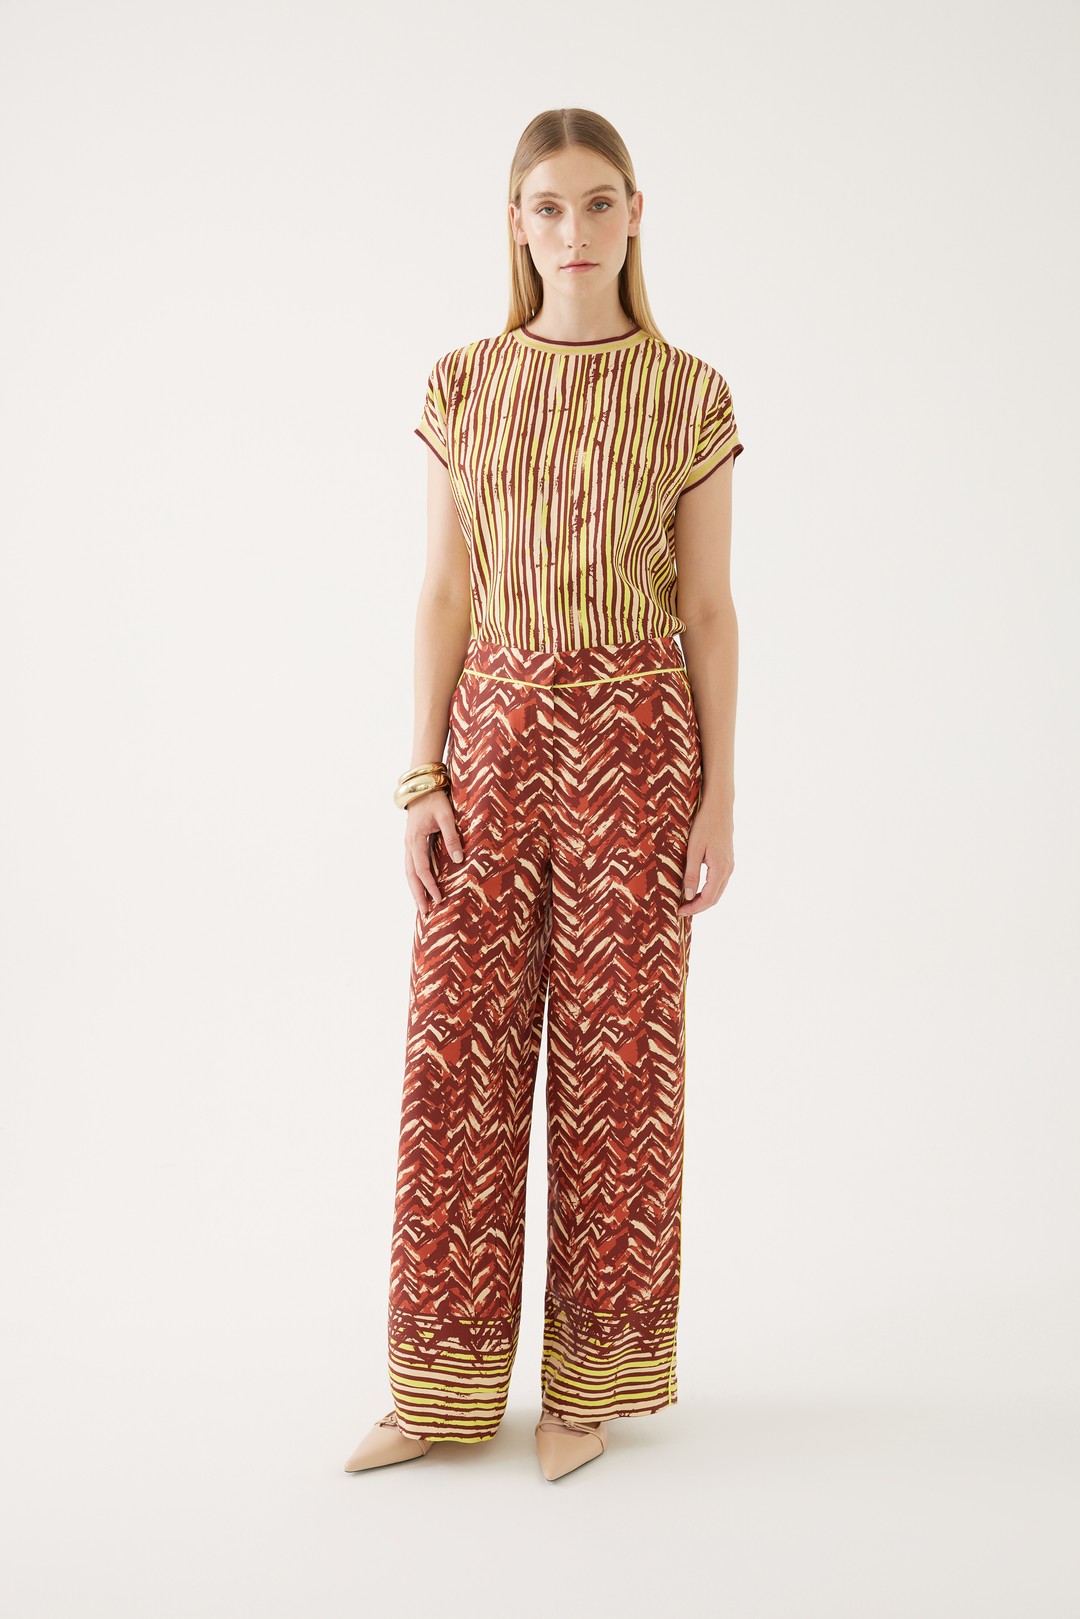 Intricate Patterned Pants 1